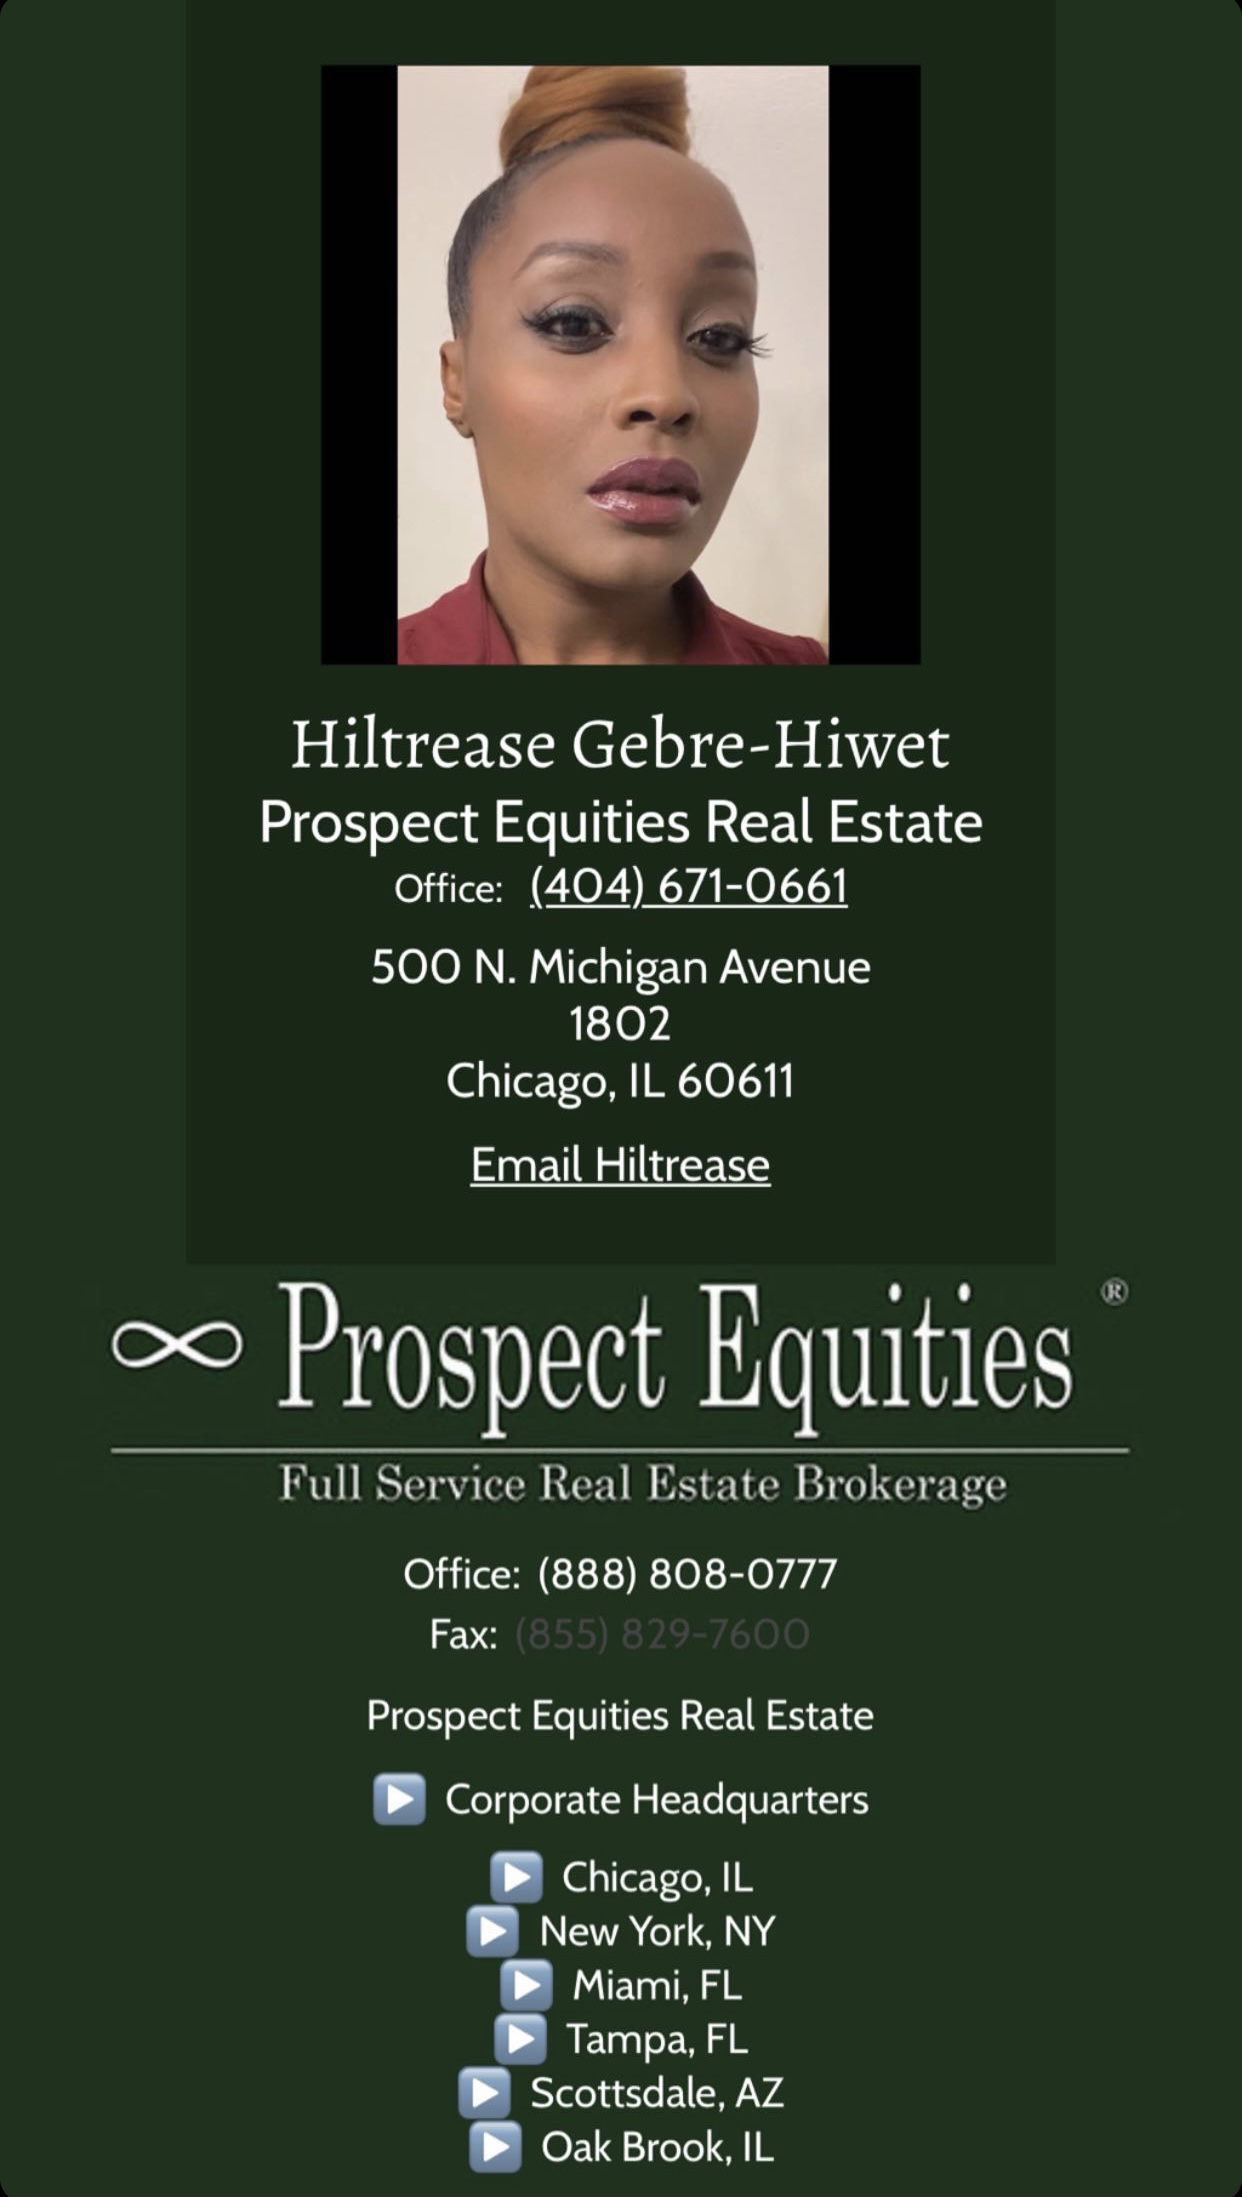 Hiltrease Gibre Hiwet profile on Prospect Equities